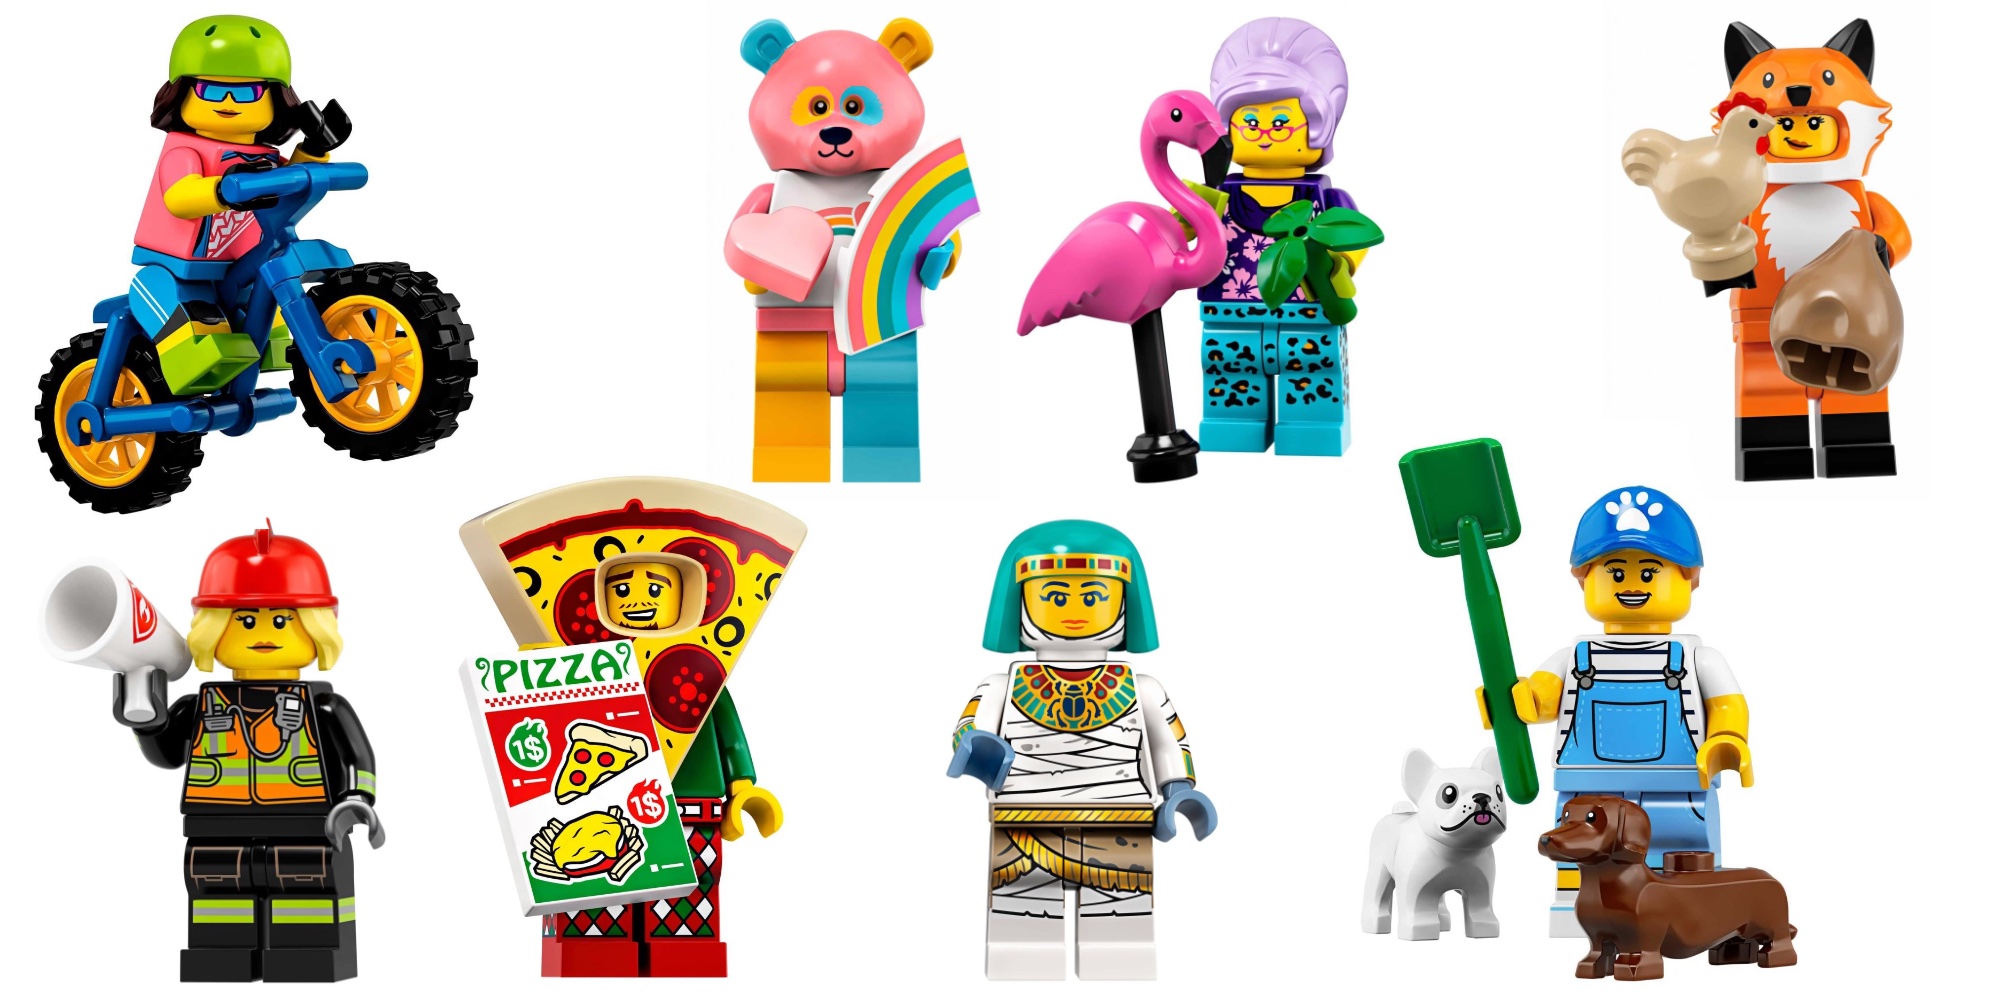 Lego Minifigure Series 19 Includes 16 New Collectible Figures 9to5toys